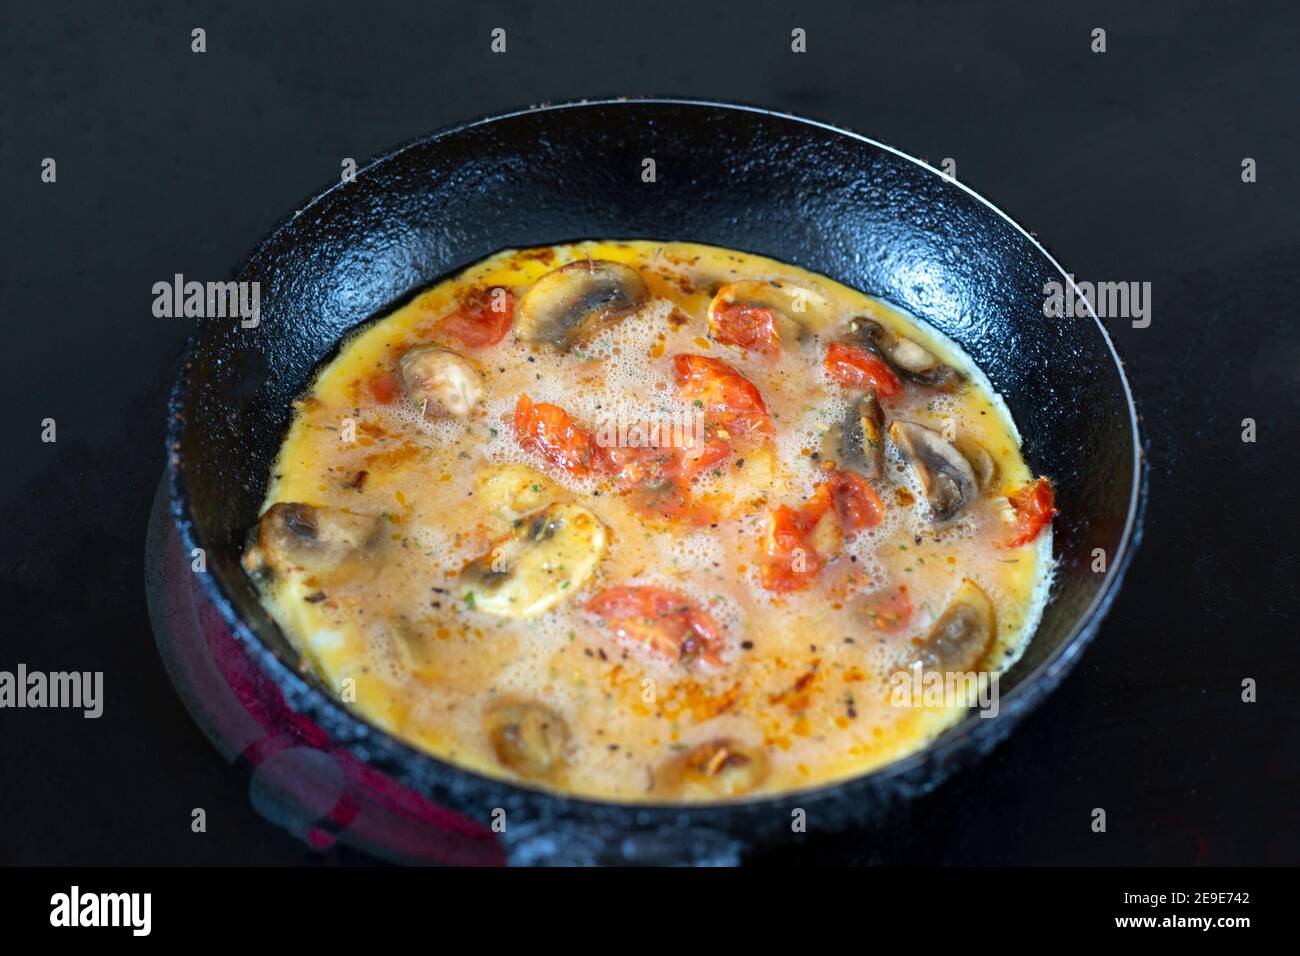 Spanish omelette in a small frying pan Stock Photo